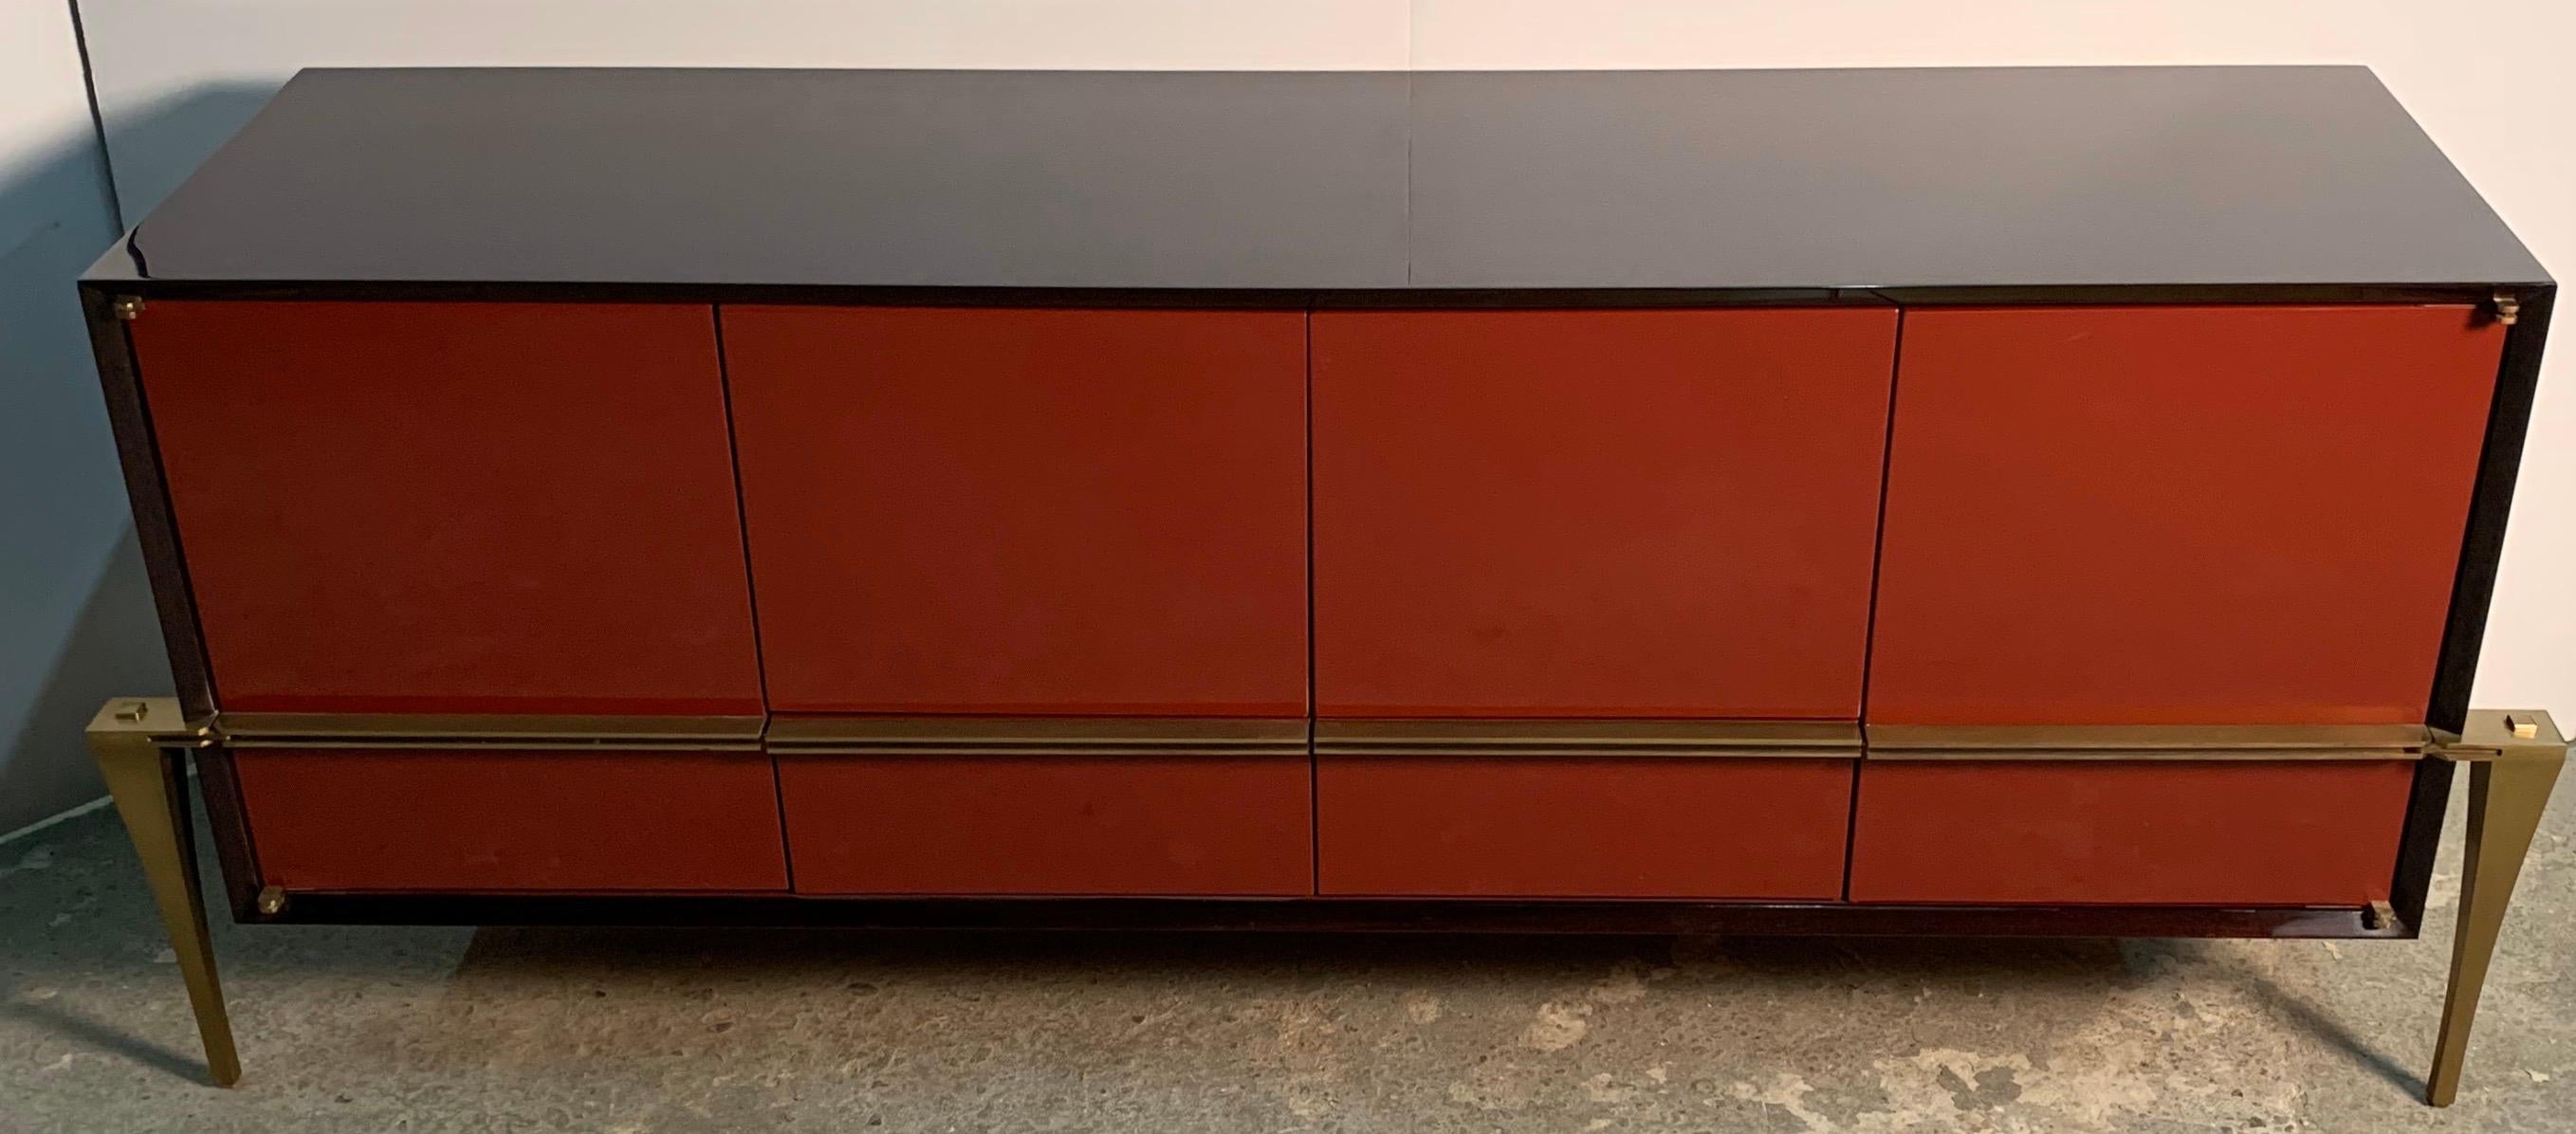 A wonderful red lacquered and Australian walnut with bronze legs and Handel's credenza cabinet by The World Famous Lorin Marsh Showroom
Titled 